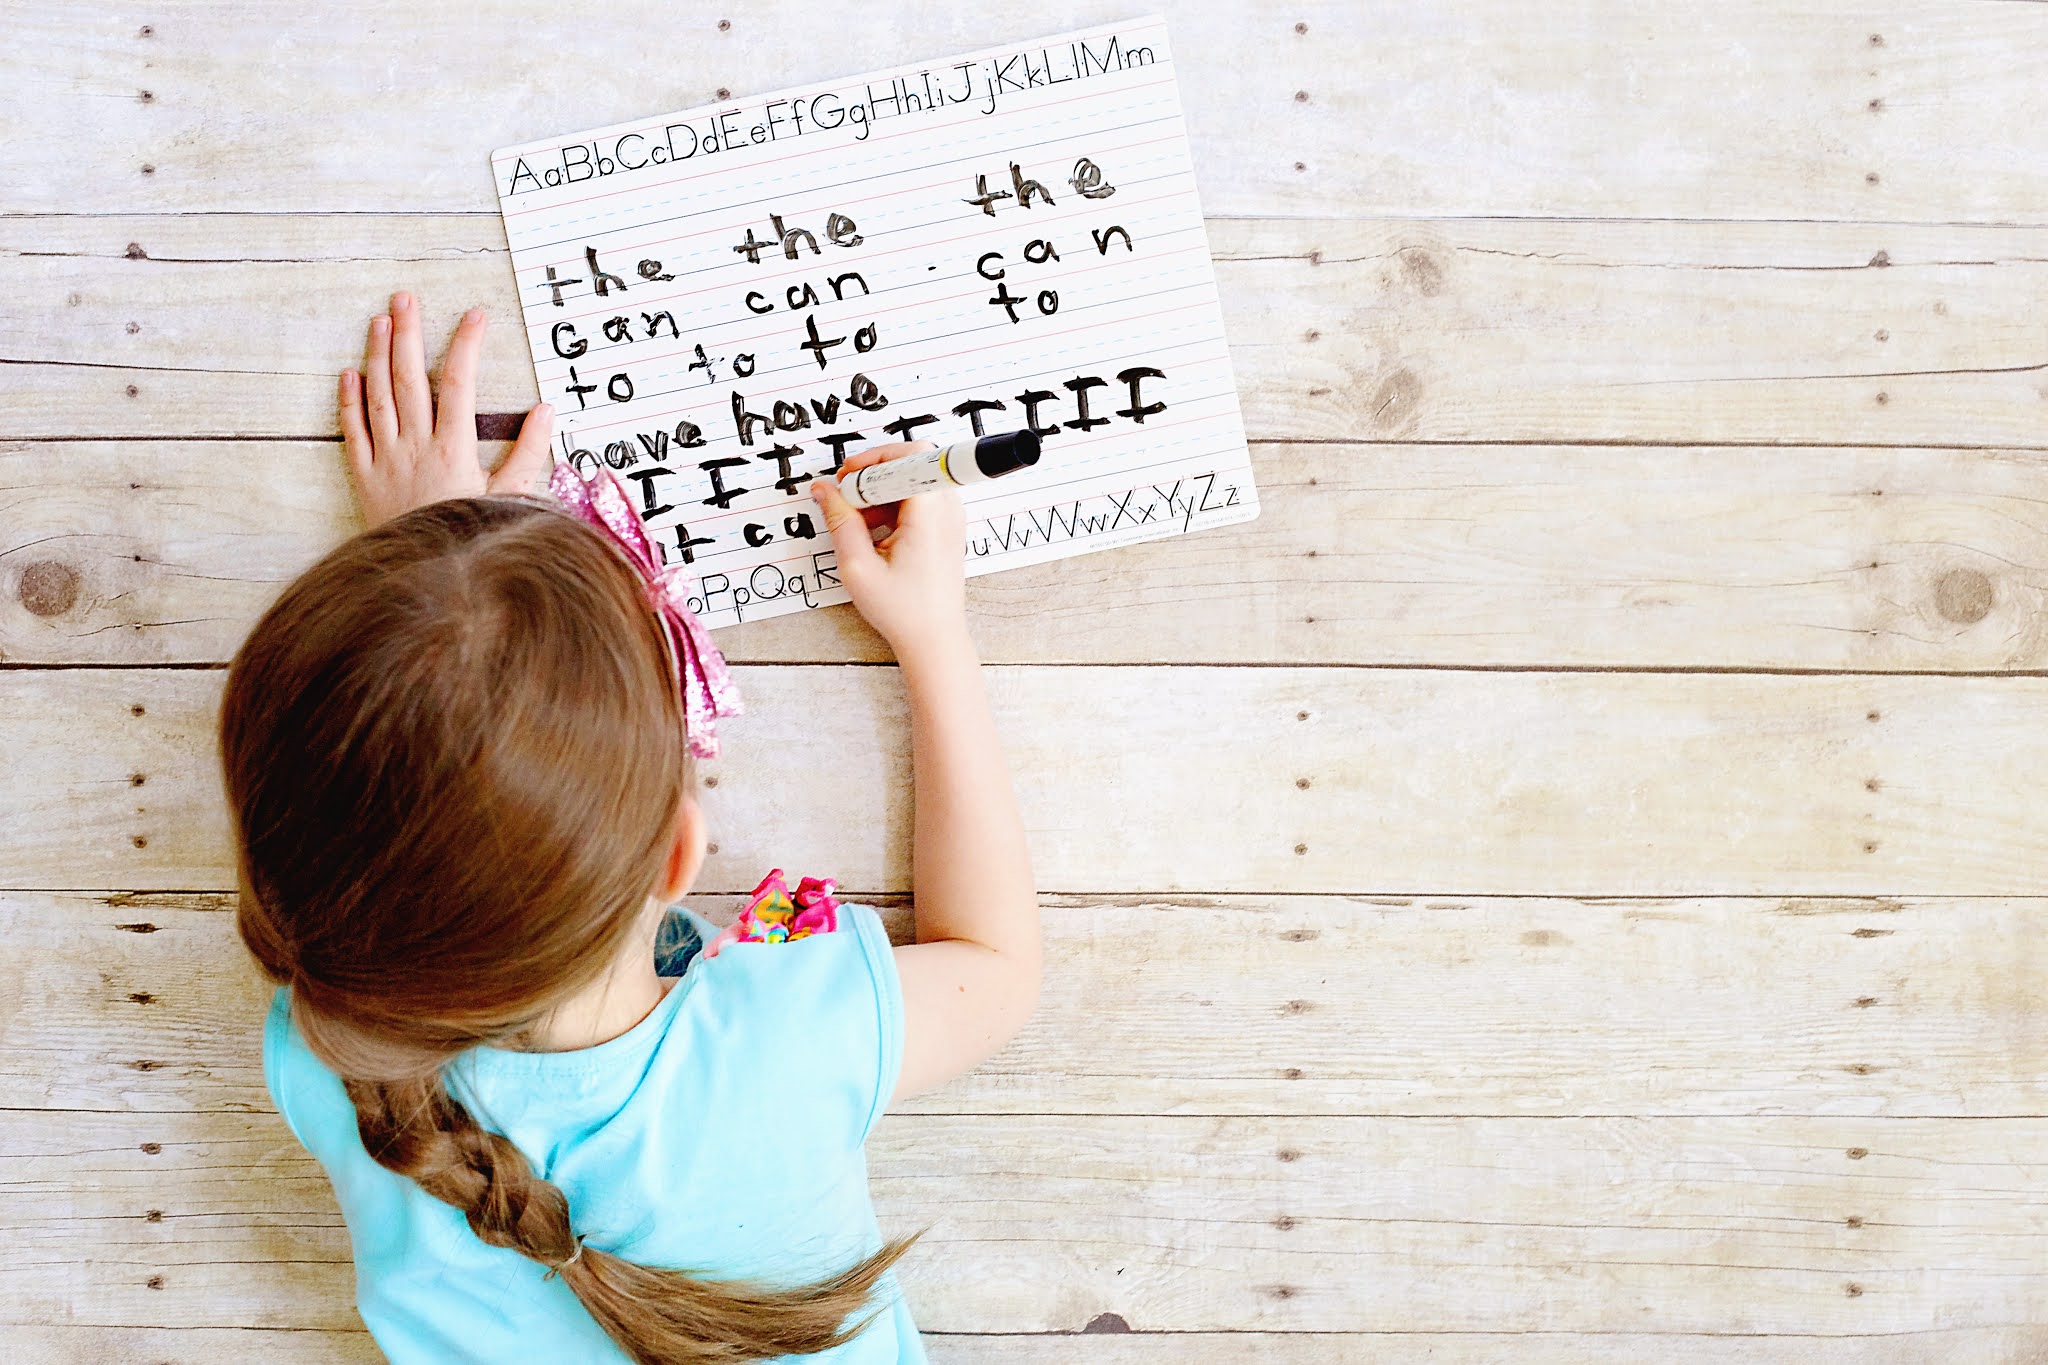 We learn new words. Children write. Children learn New Words. Окошко fun and Learning writing. Teach Word.